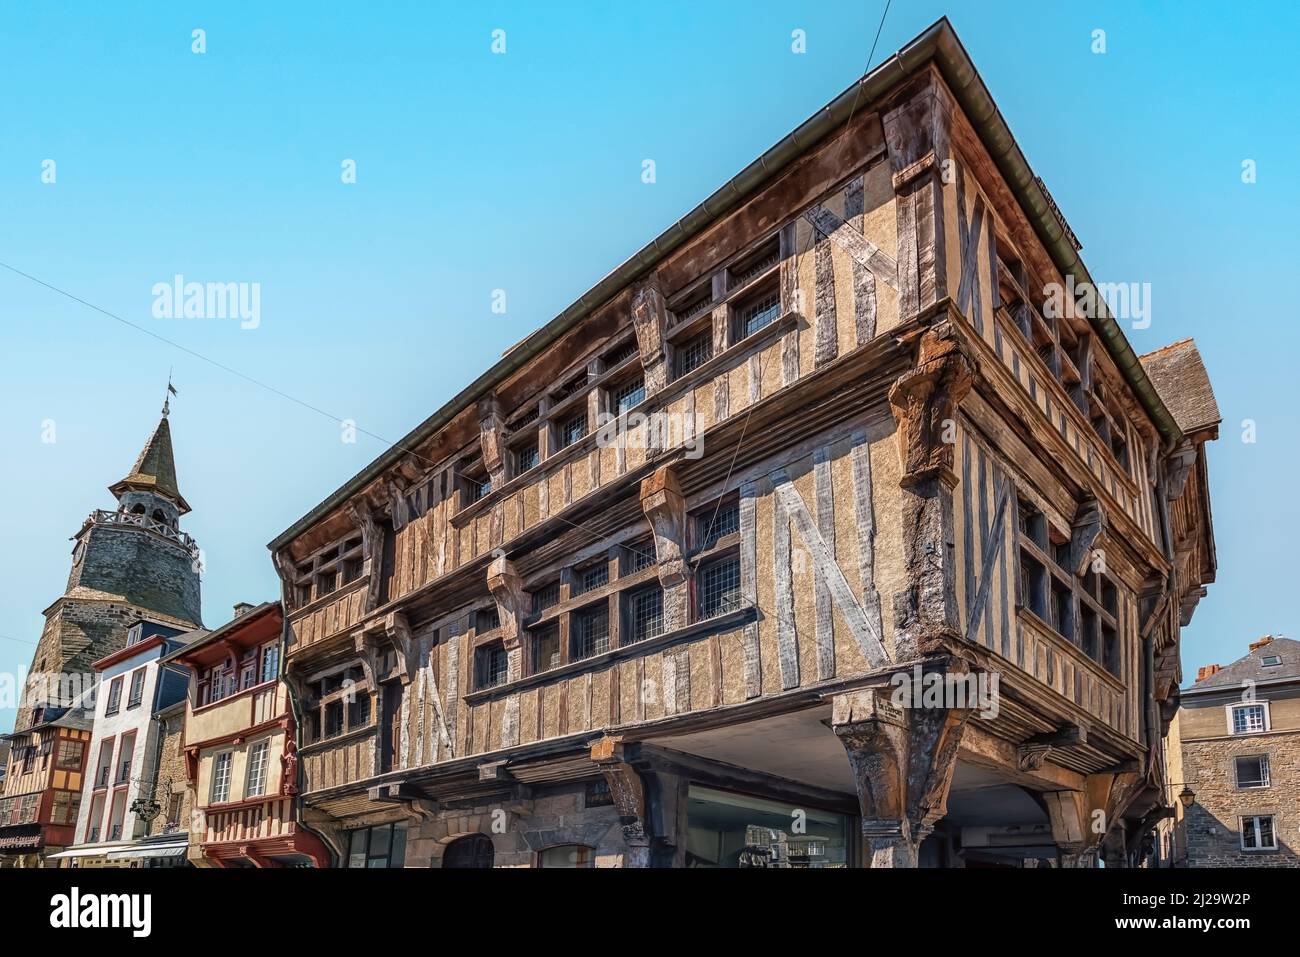 Medieval architecture in the town of Dinan, France Stock Photo